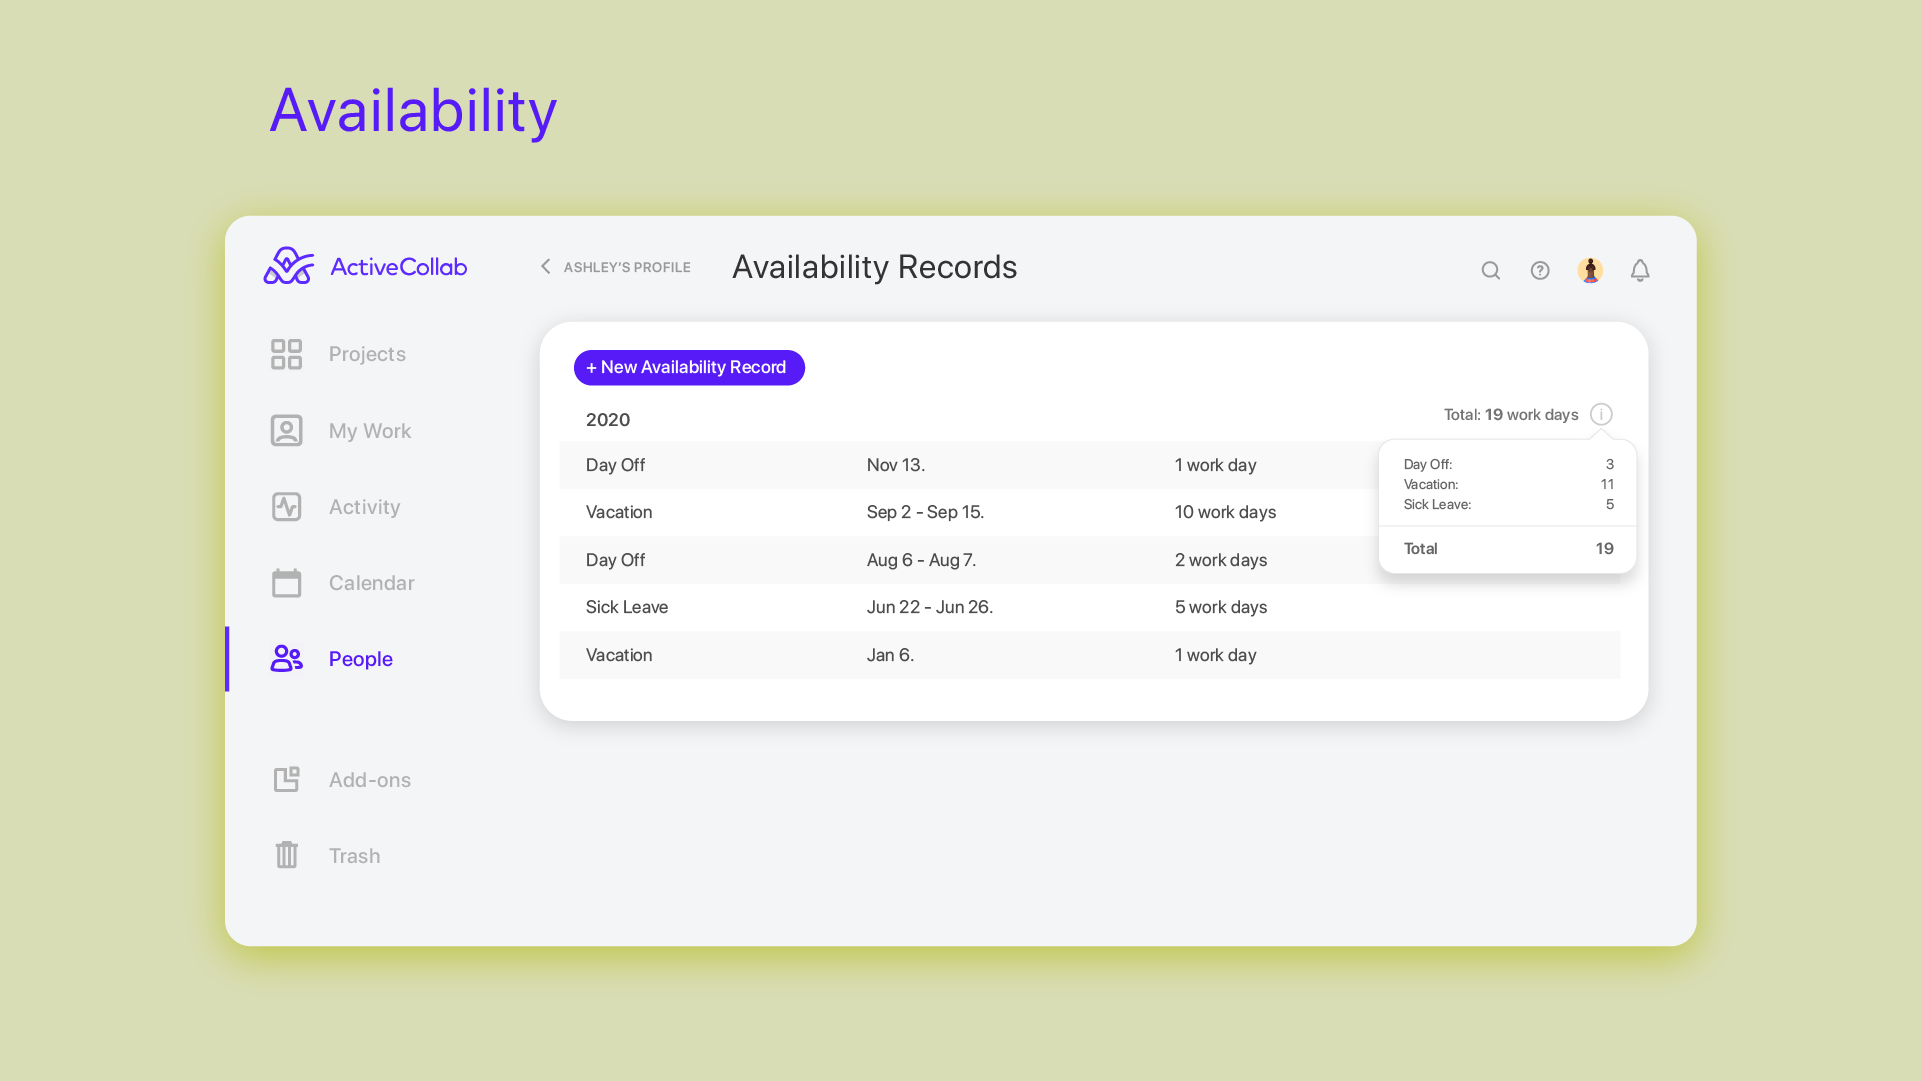 Everyone’s availability at a glance